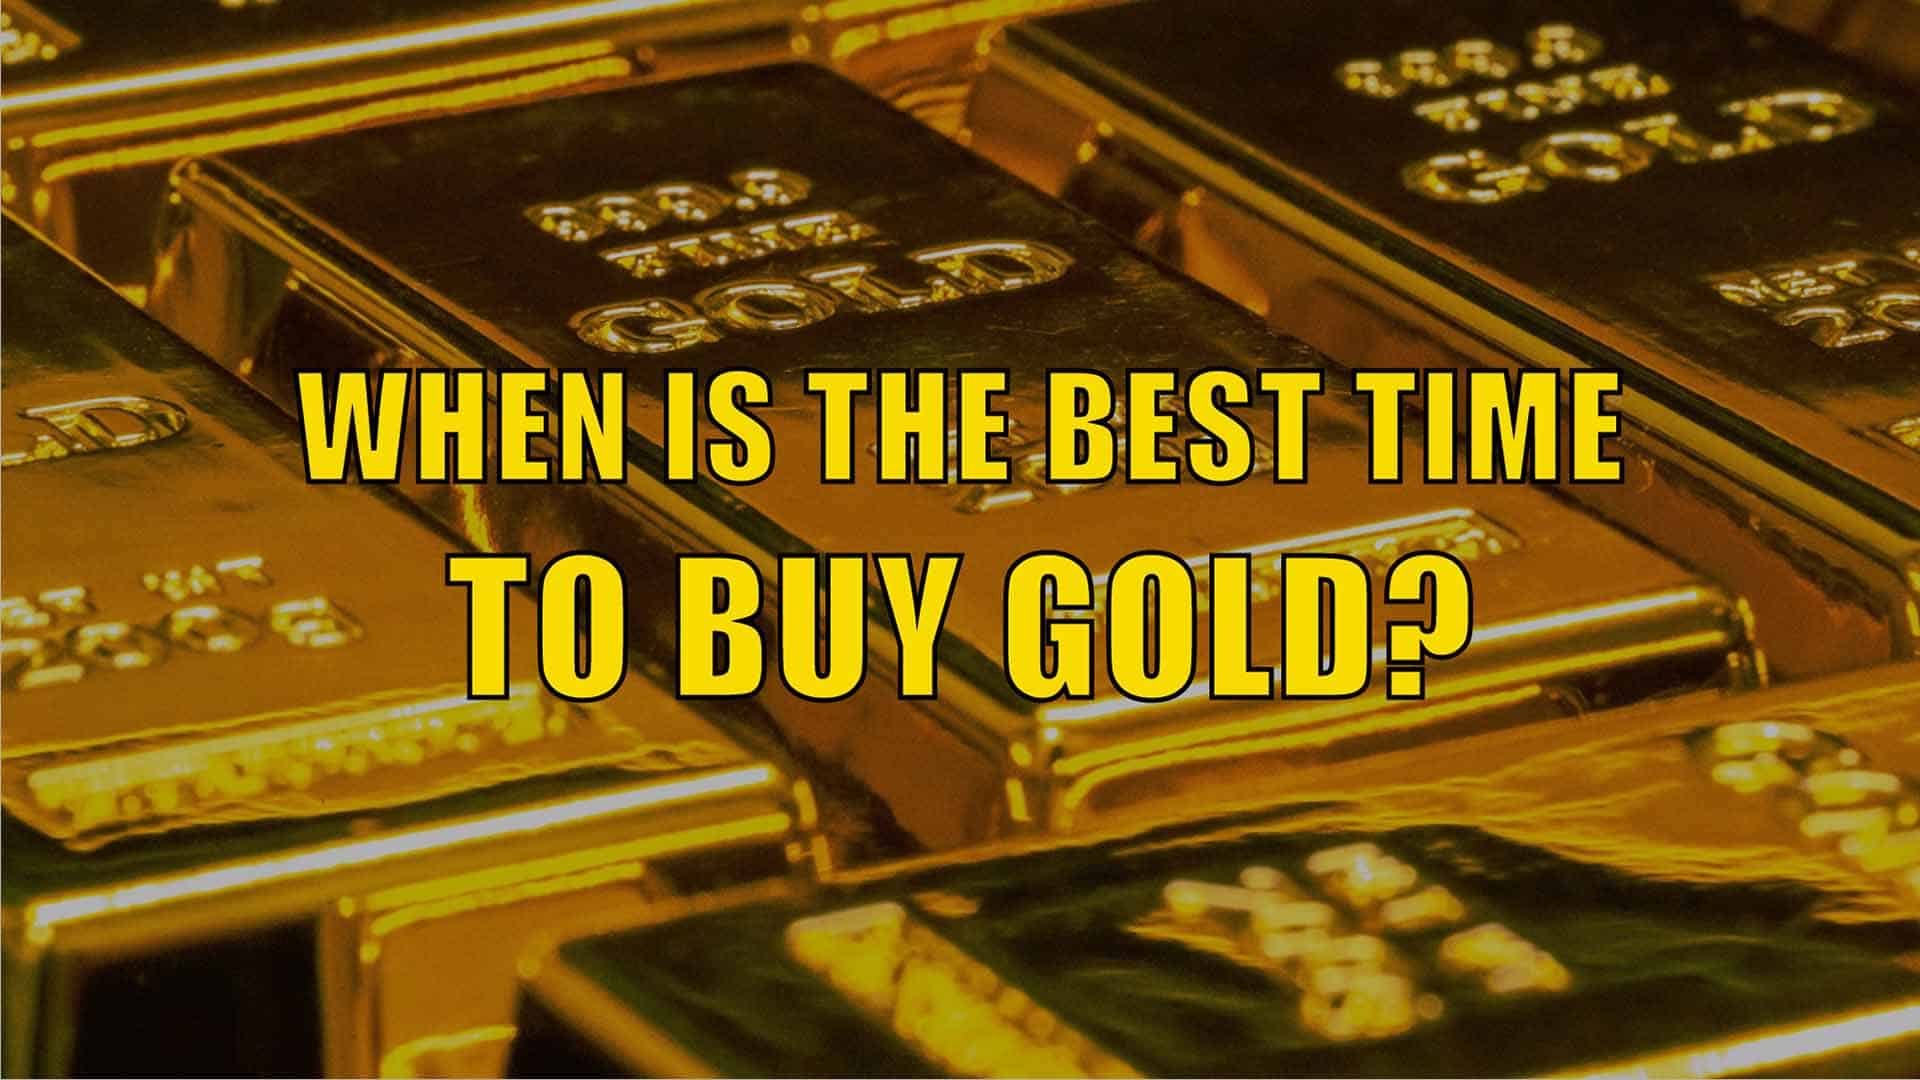 When is the Best Time to Buy Gold? Gold Survival Guide